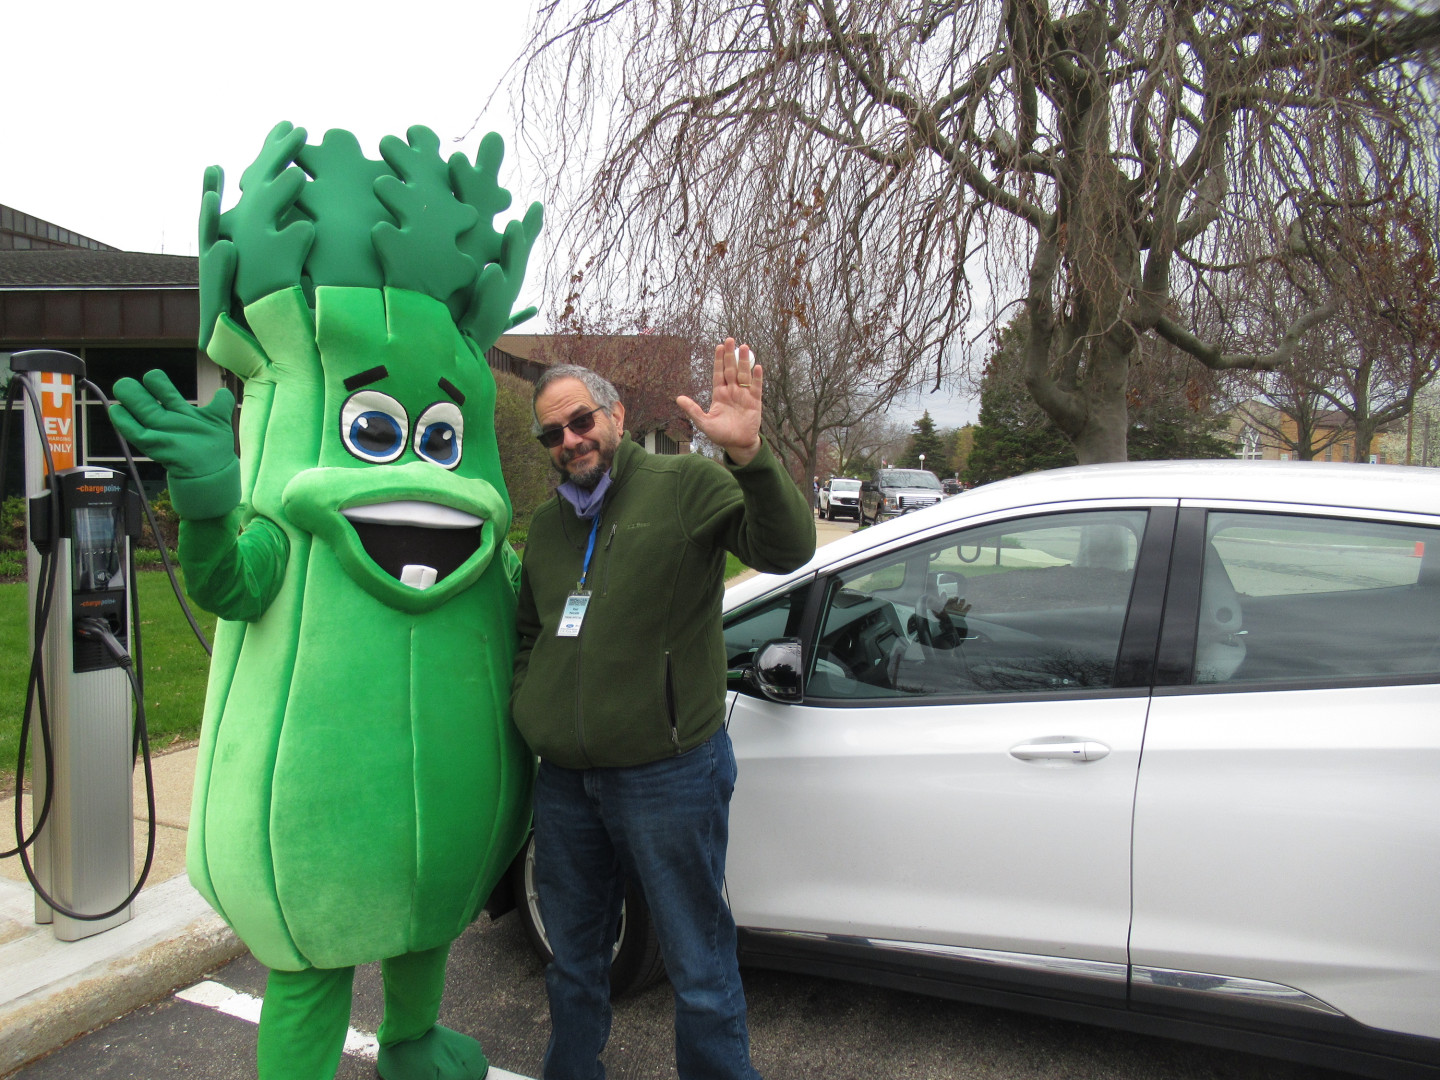 Paul Pancella stands next to a person in a celery mascot costume.